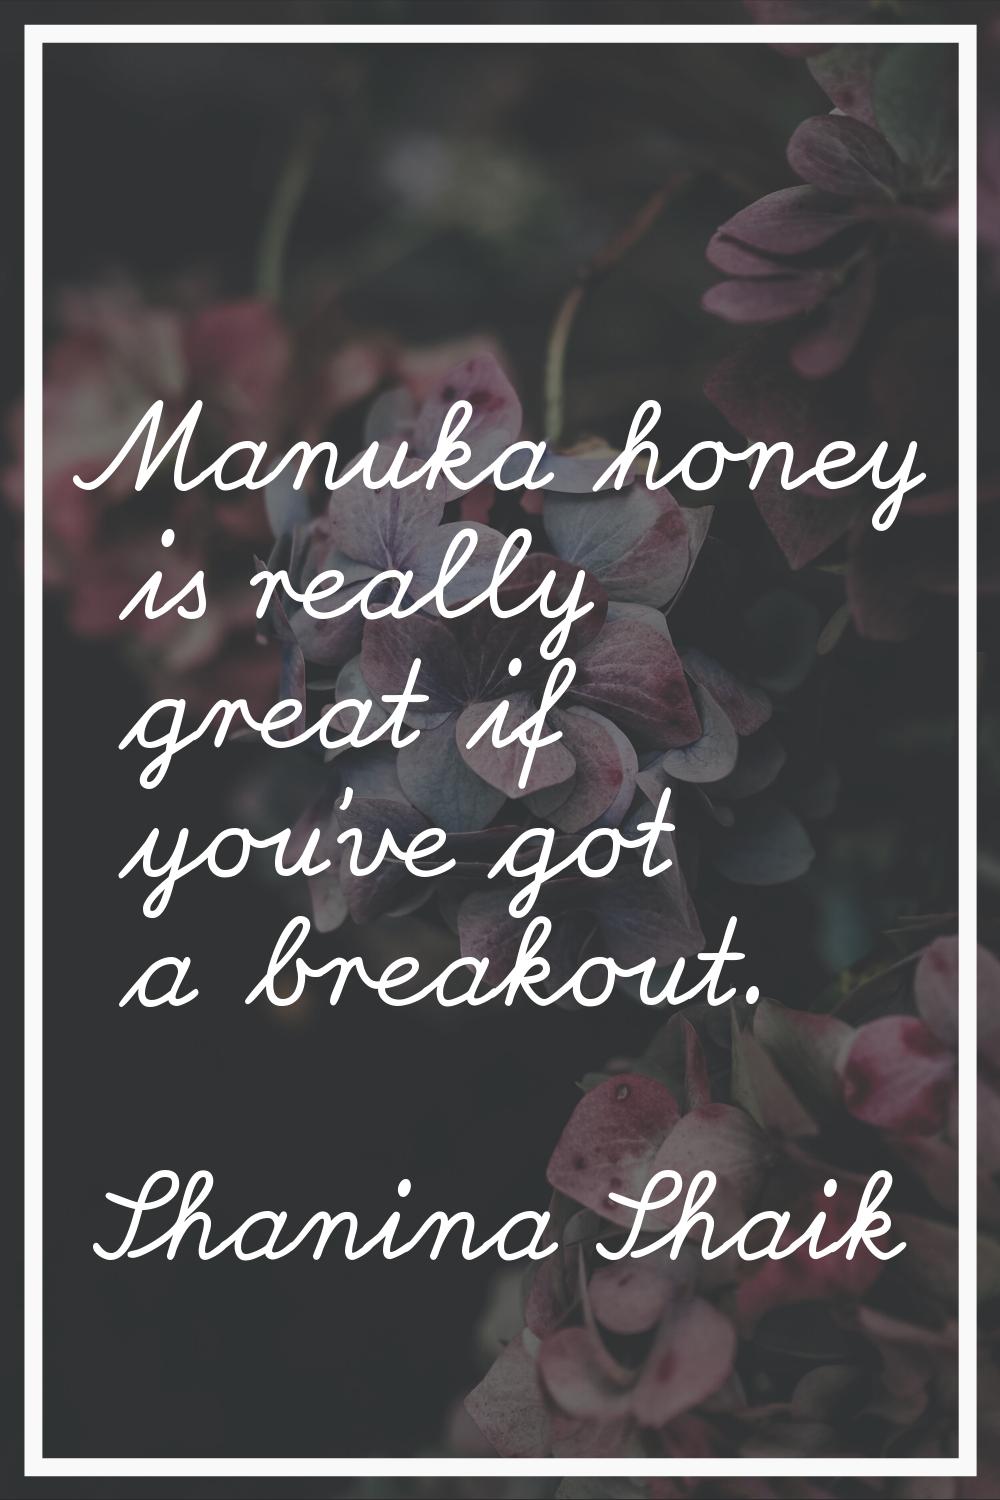 Manuka honey is really great if you've got a breakout.